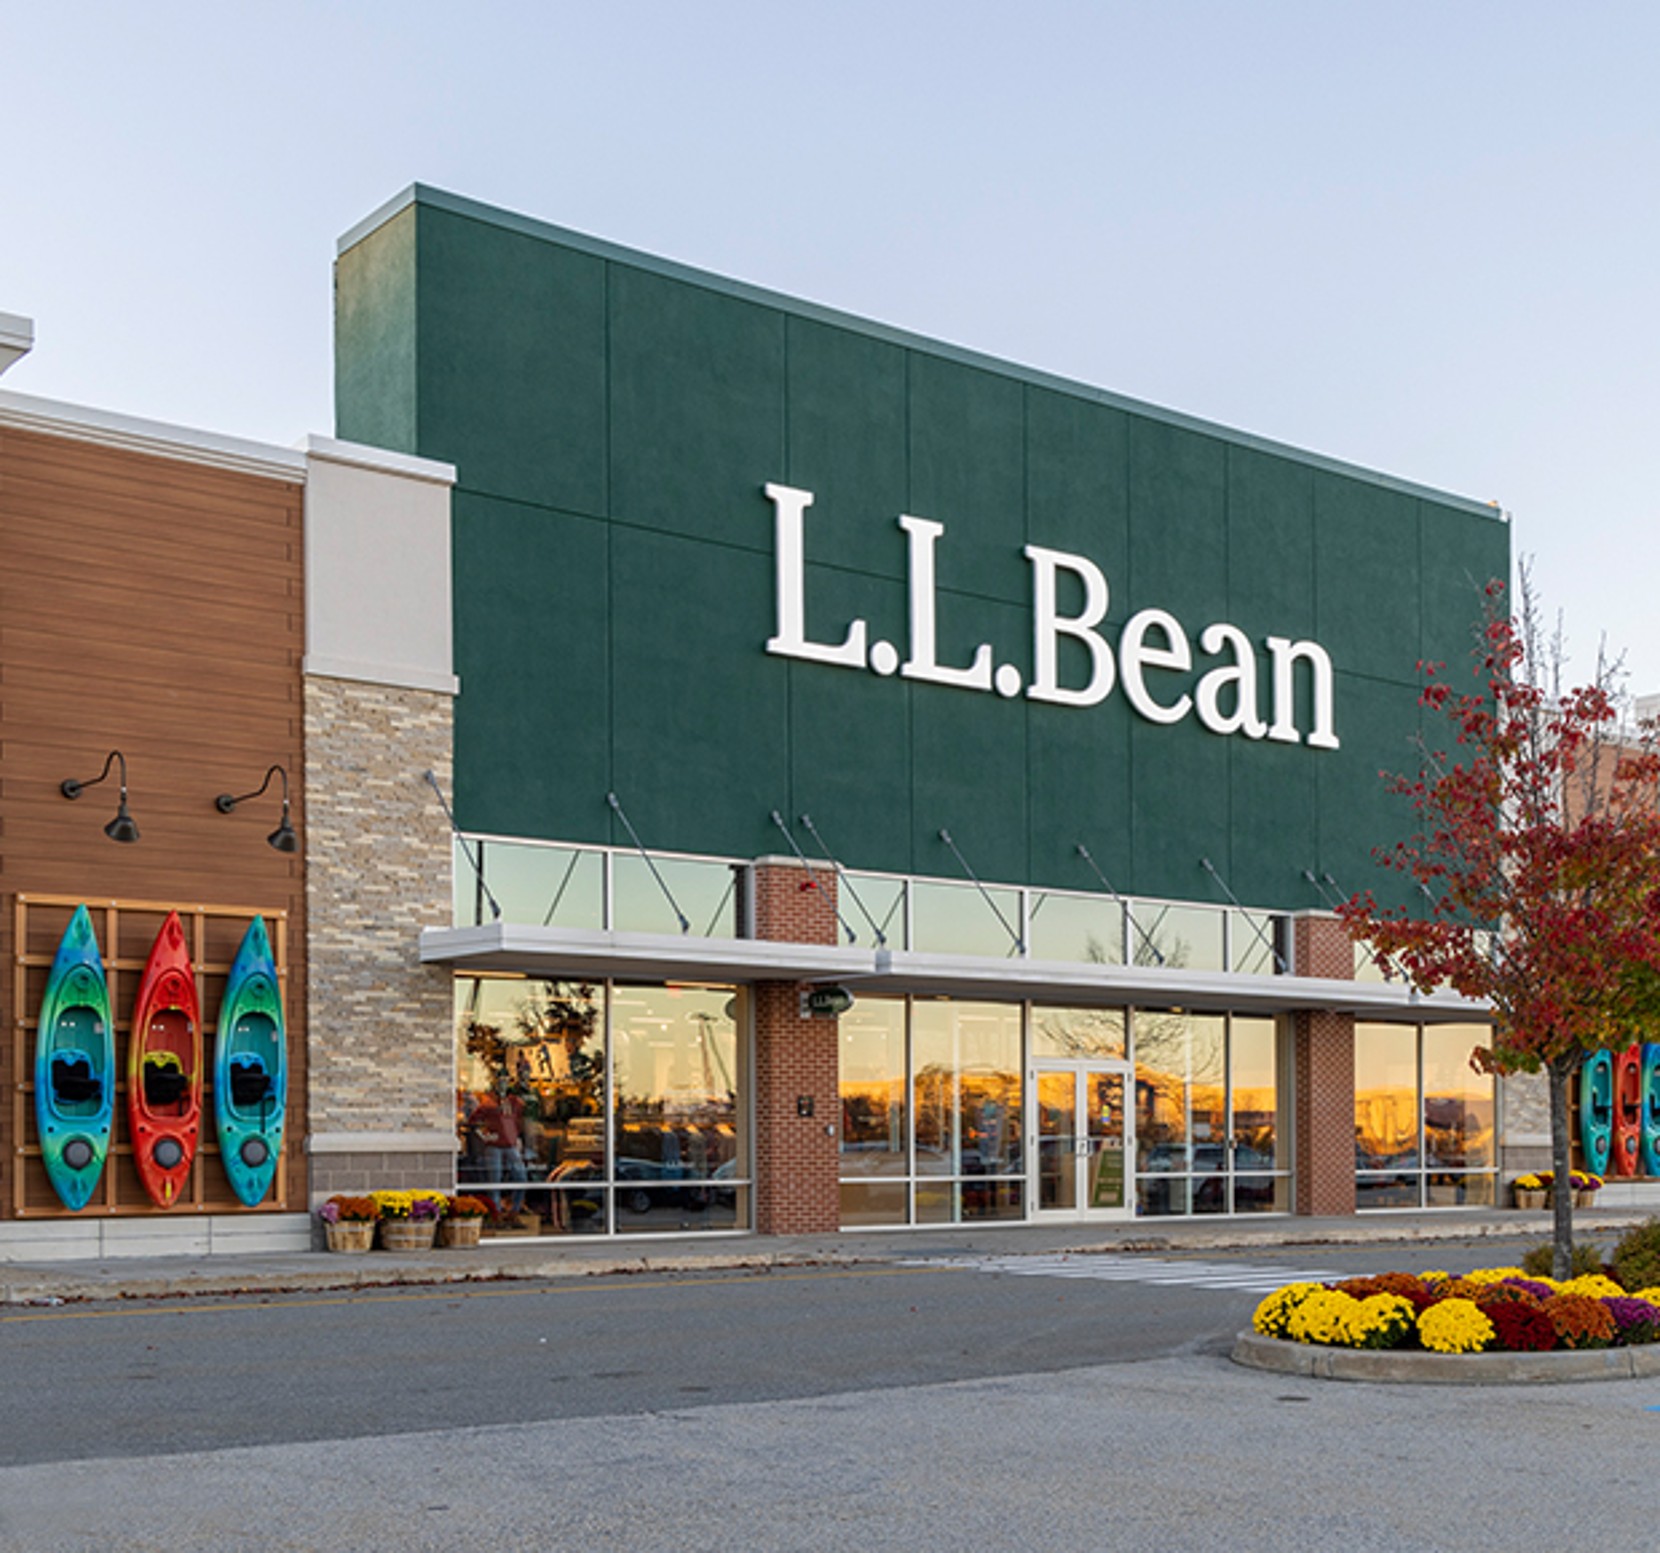 Adventures are in store. L.L.Bean is coming soon